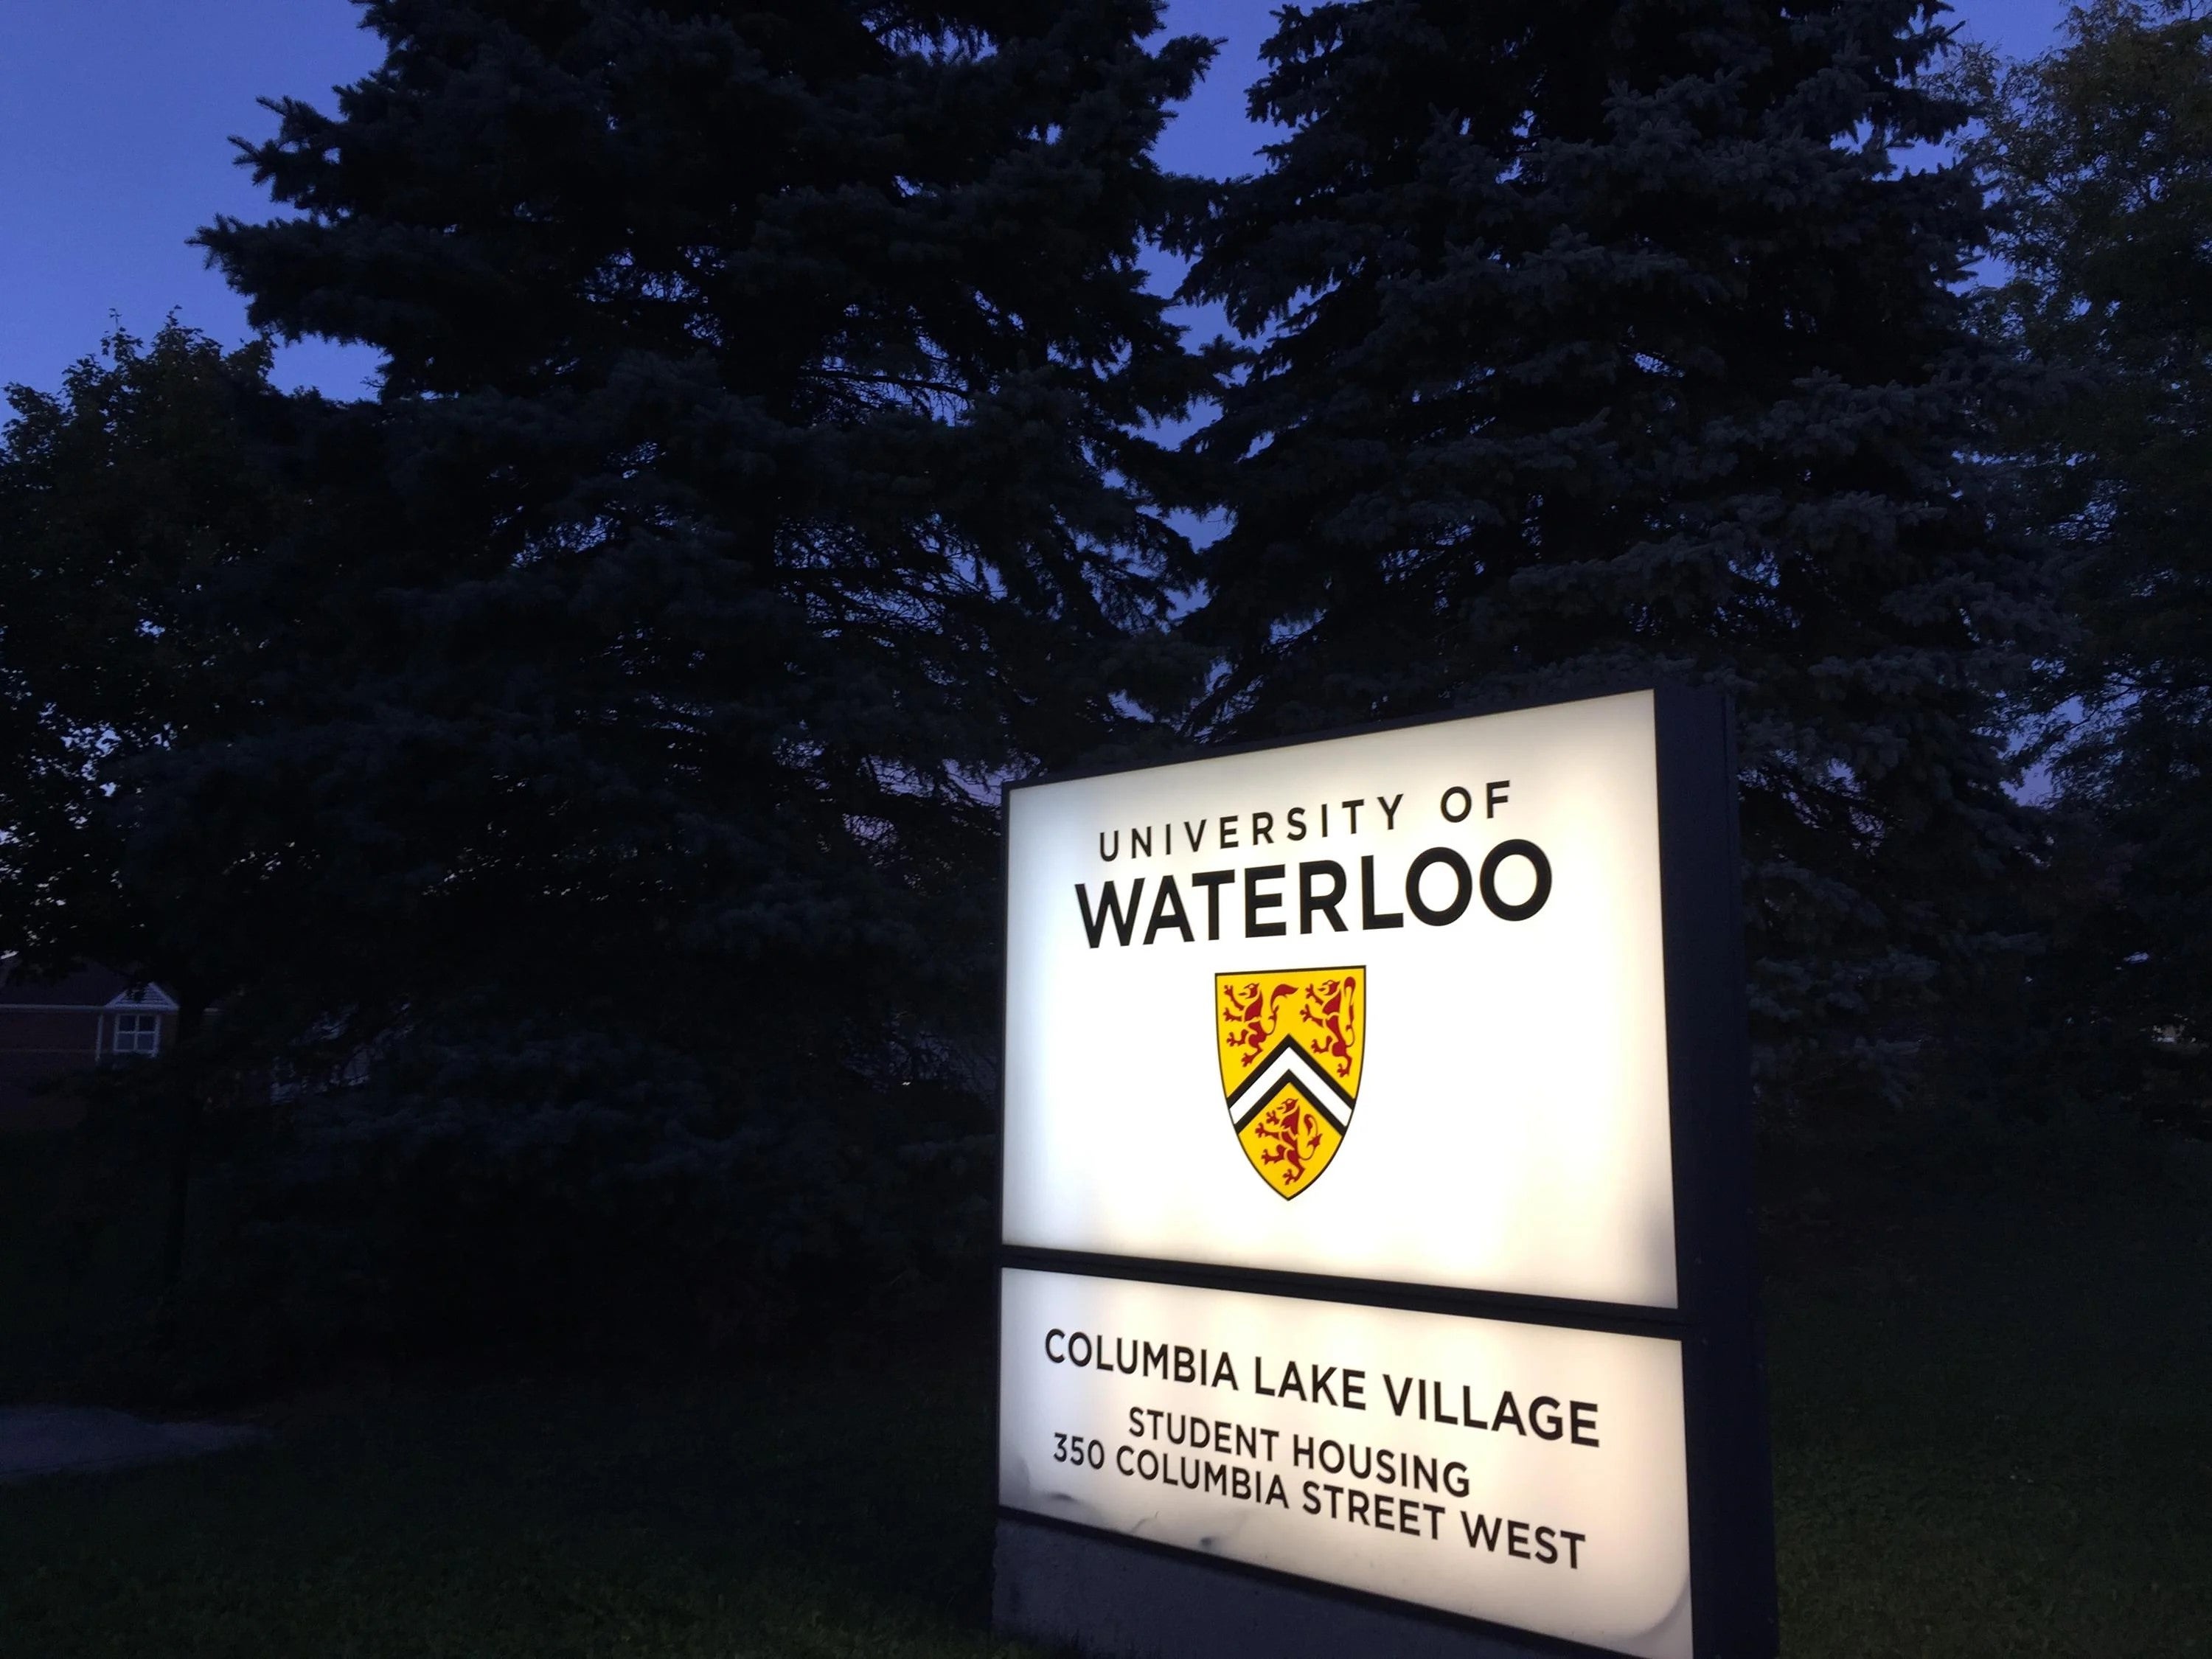 Entrance sign to the University's Columbia Lake Village residence.